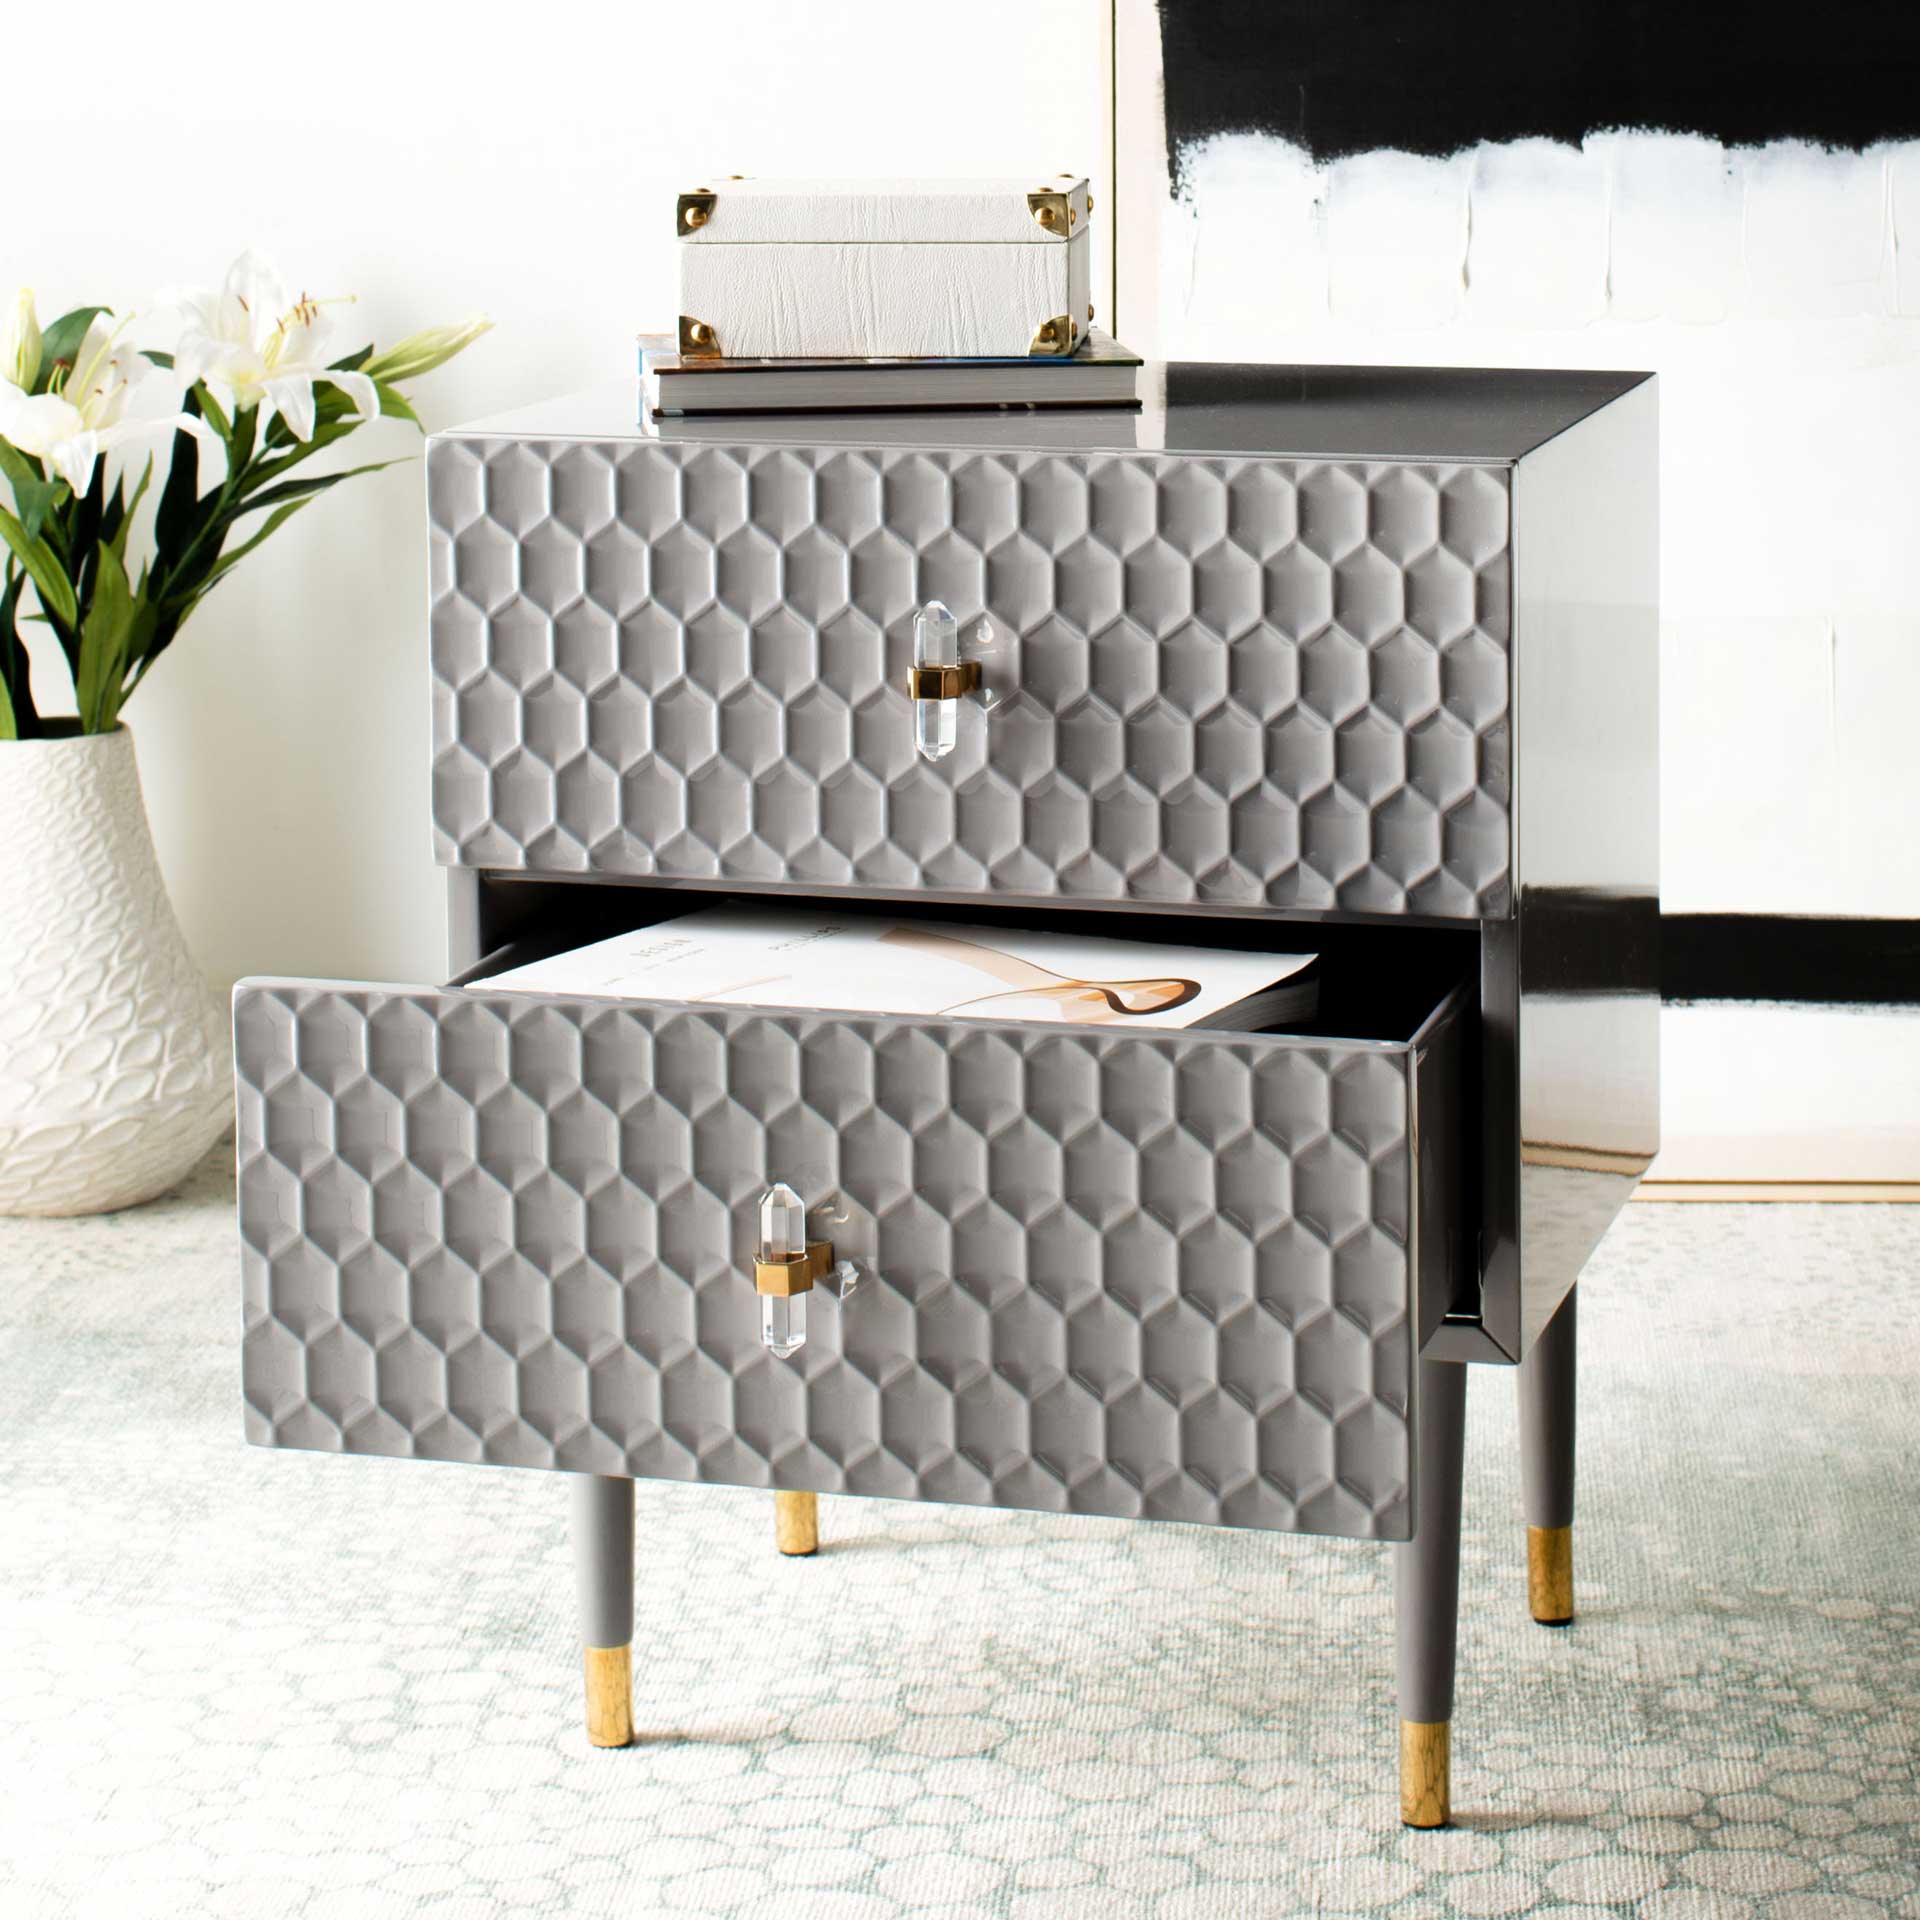 Nevaeh 2 Drawer Side Table Gray/Gold